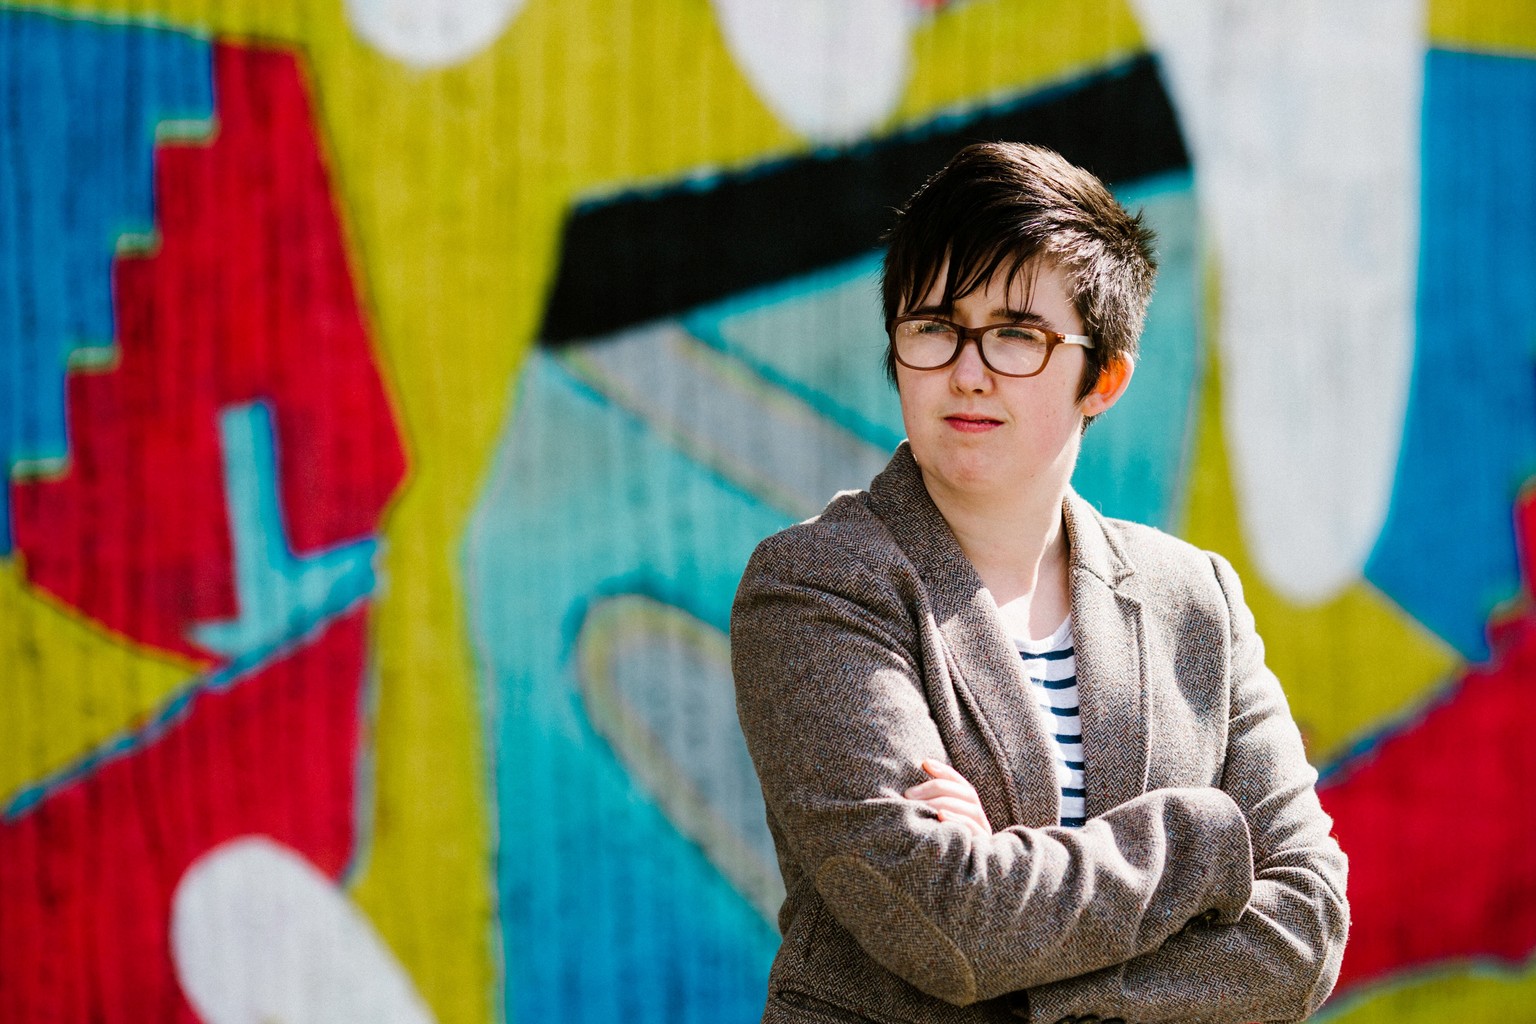 Journalist Lyra McKee poses for a portrait outside the Sunflower Pub on Union Street in Belfast, Northern Ireland May 19, 2017. Jess Lowe Photography/Handout via REUTERS ATTENTION EDITORS - THIS IMAGE ...